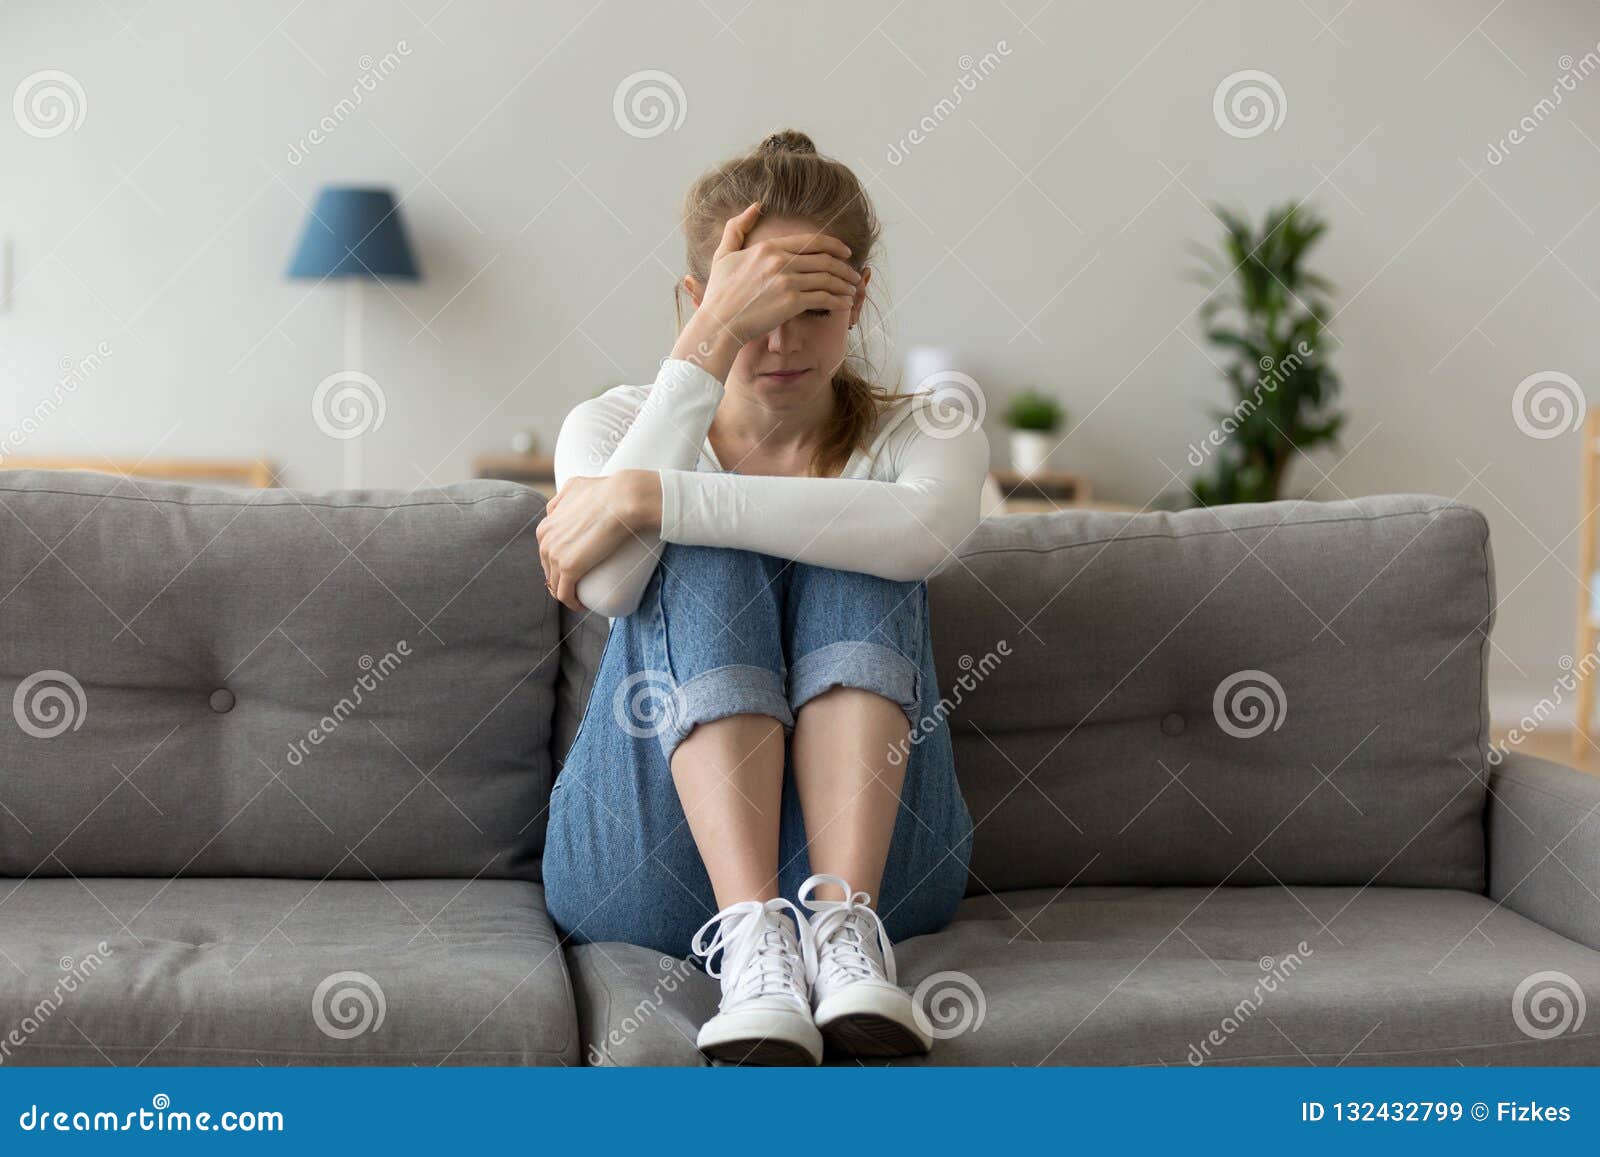 Unhappy Female Sit on Couch Feeling Sad at Home Stock Image ...